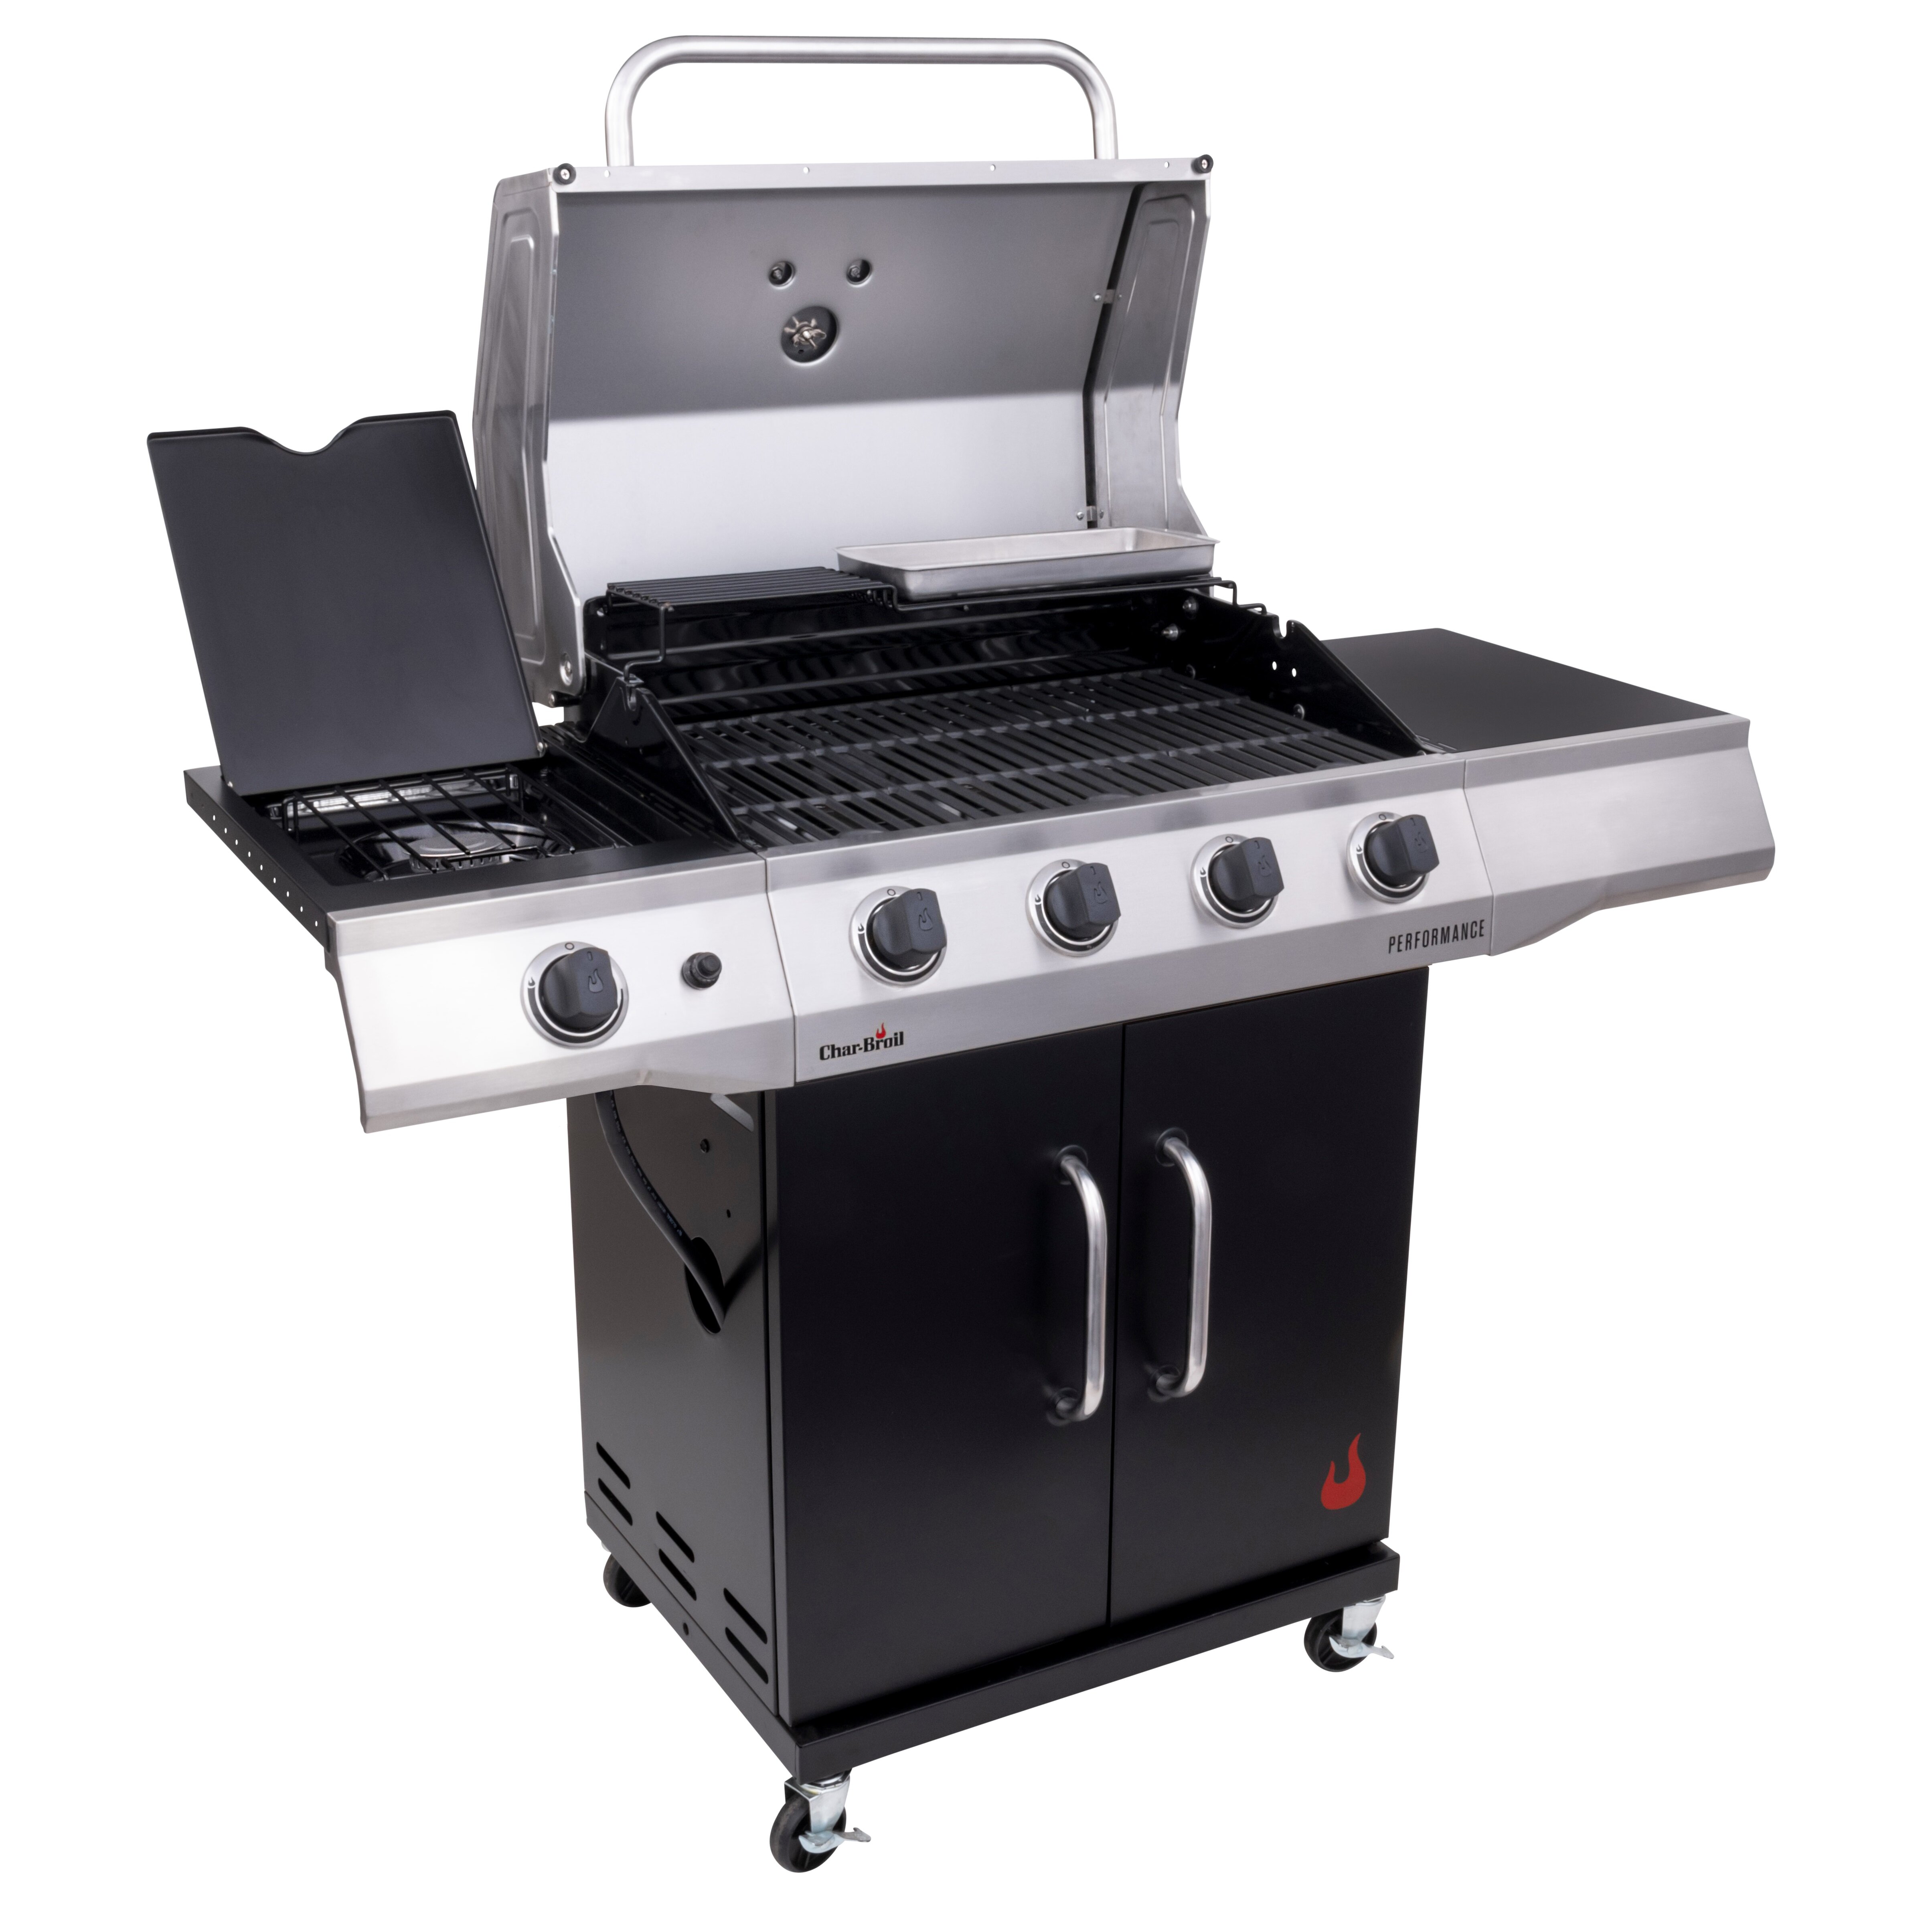 CharBroil Char-Broil - Burner Liquid Propane 3200 BTU Gas Grill with and Cabinet & Reviews | Wayfair